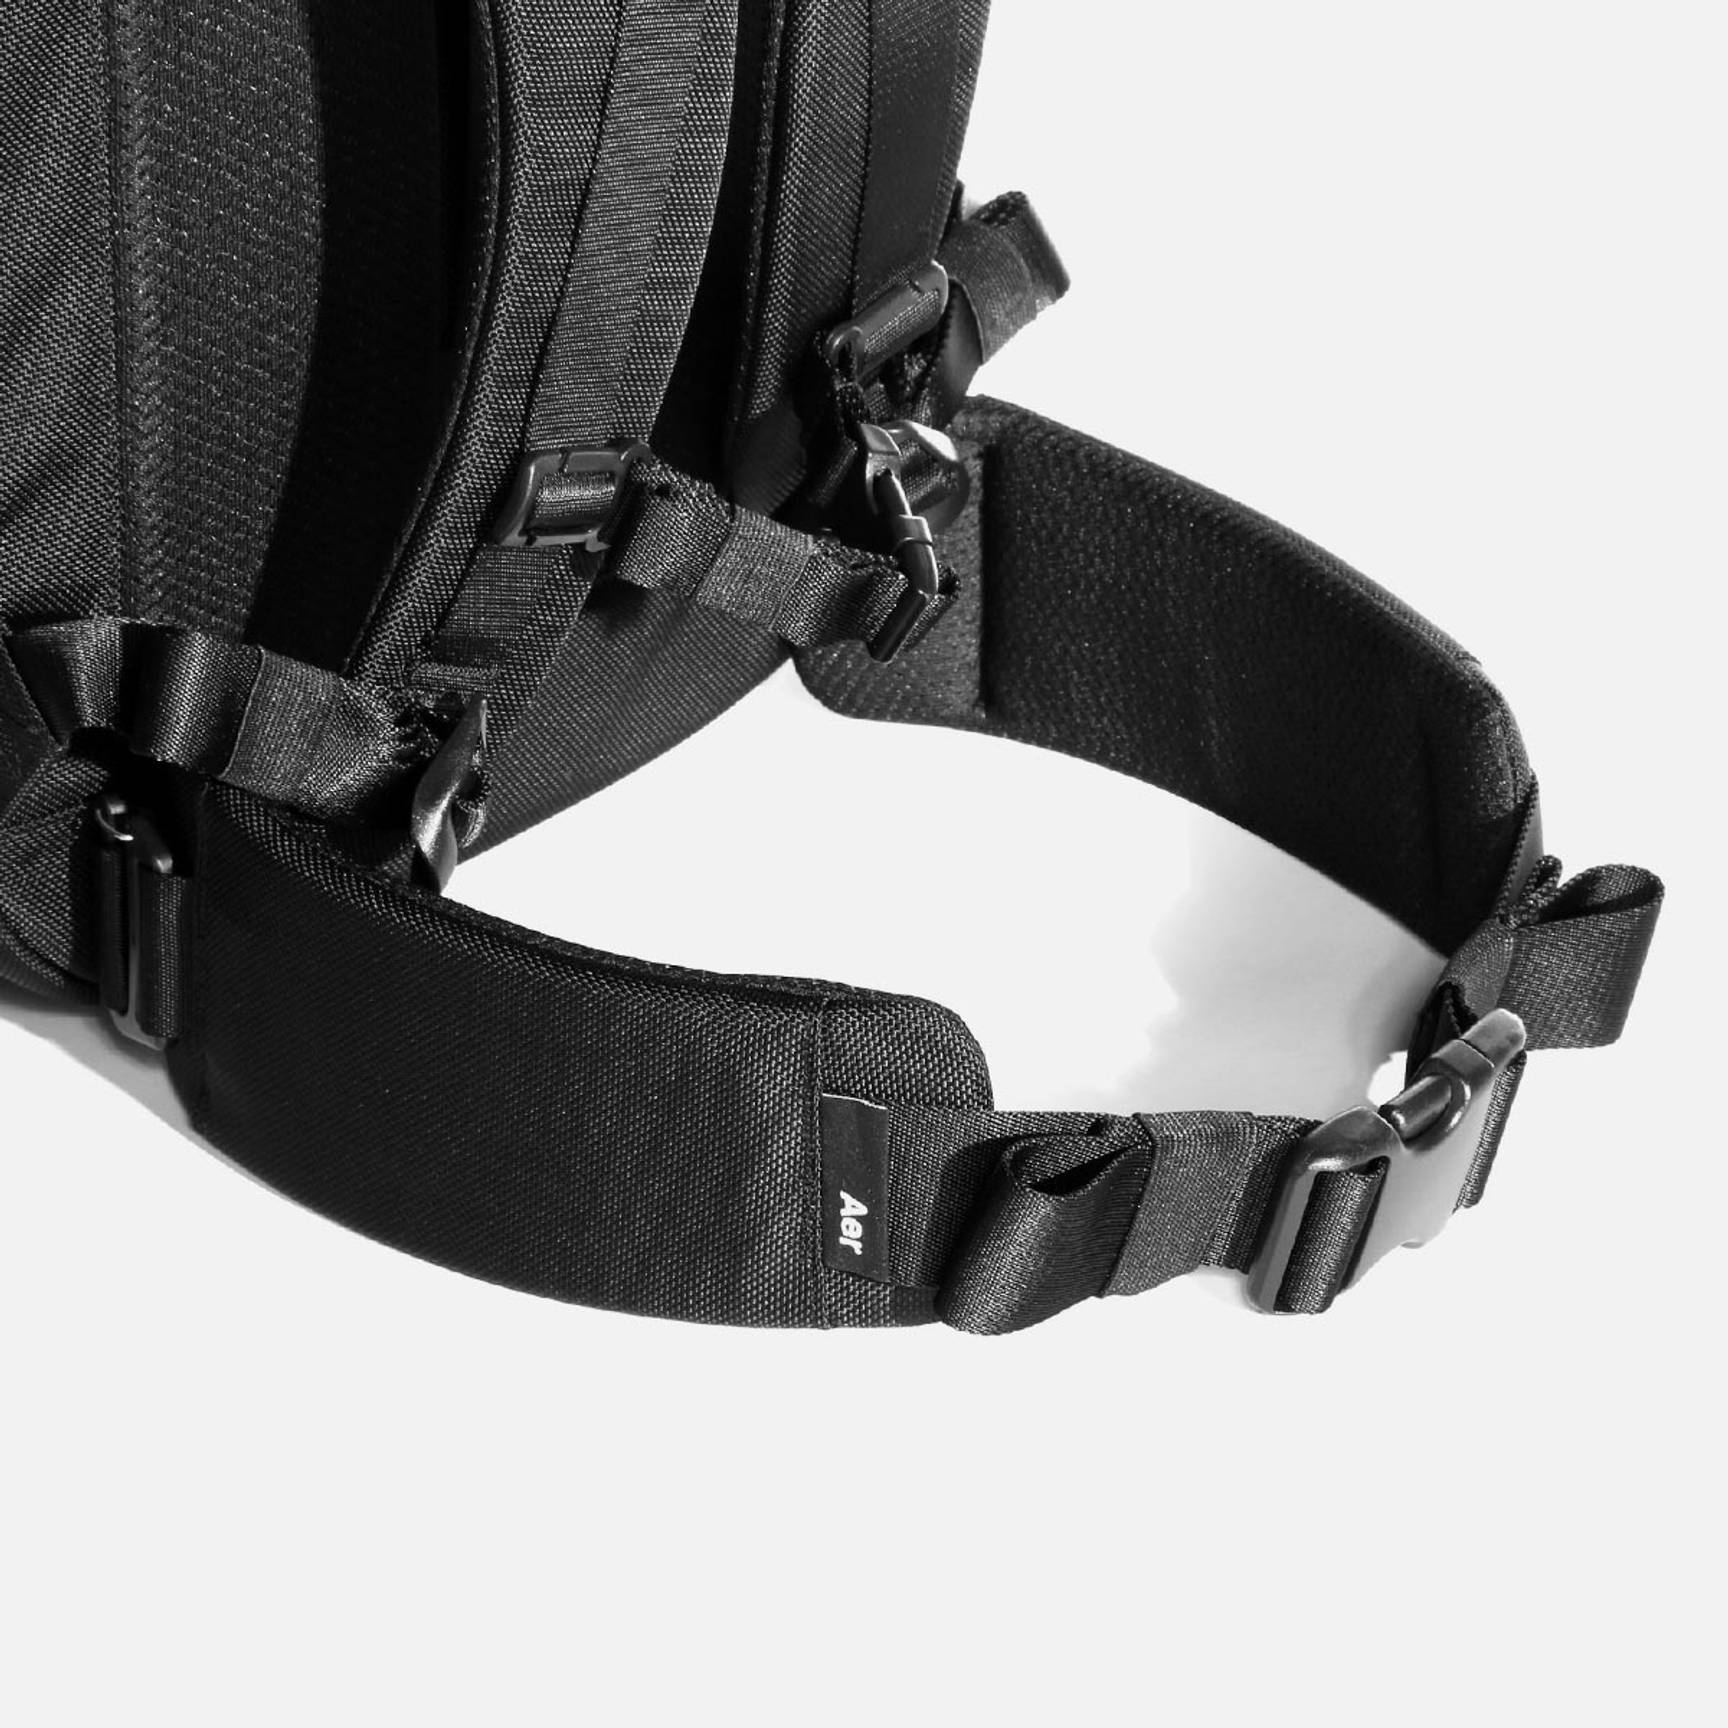 TWO Backpack Waist Belt Backpack Waist Strap Universal Fit with Buckle -  Black